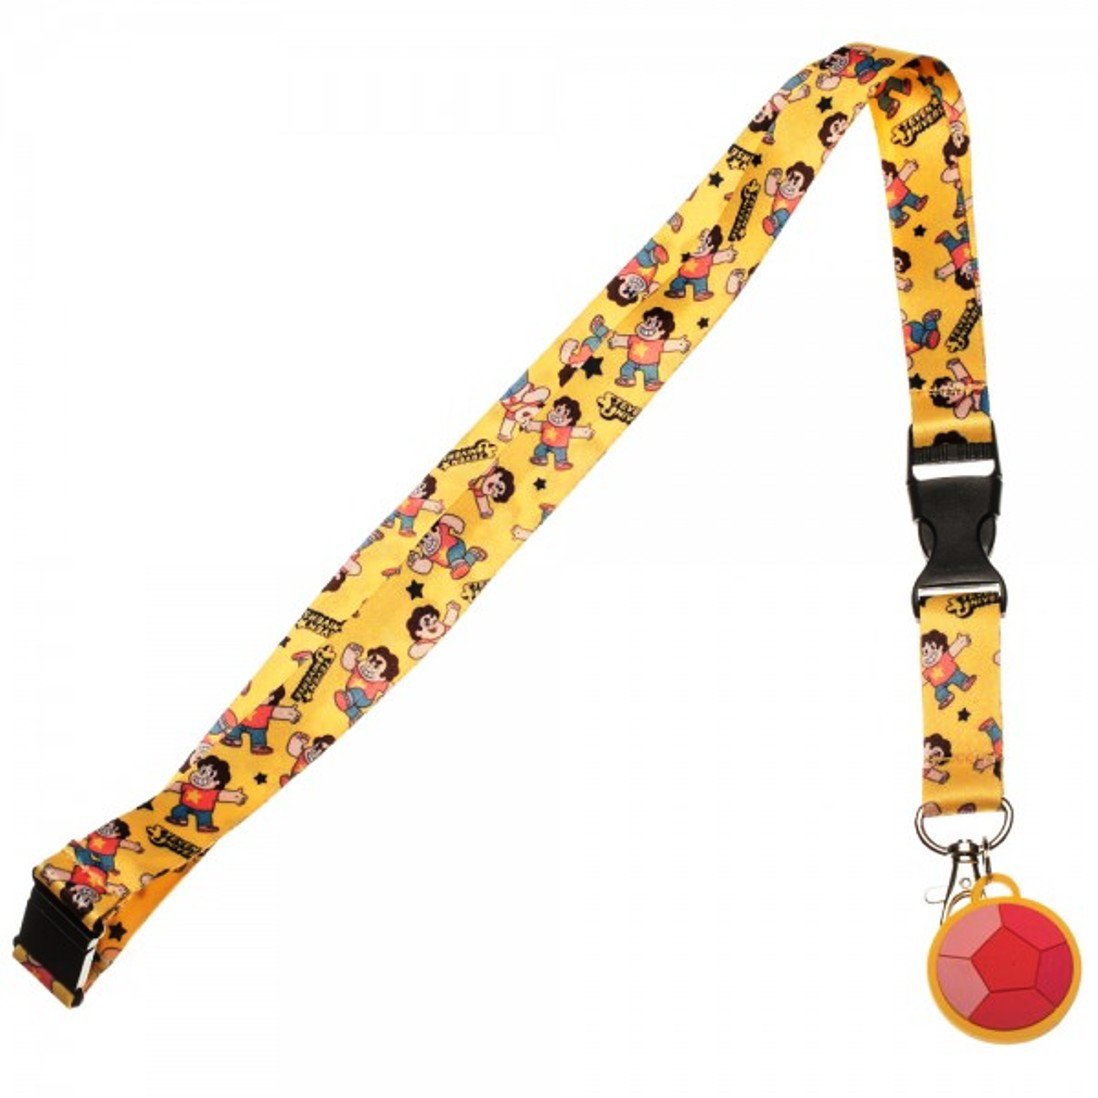 Steven Universe Limited Edition Collector's Lanyard